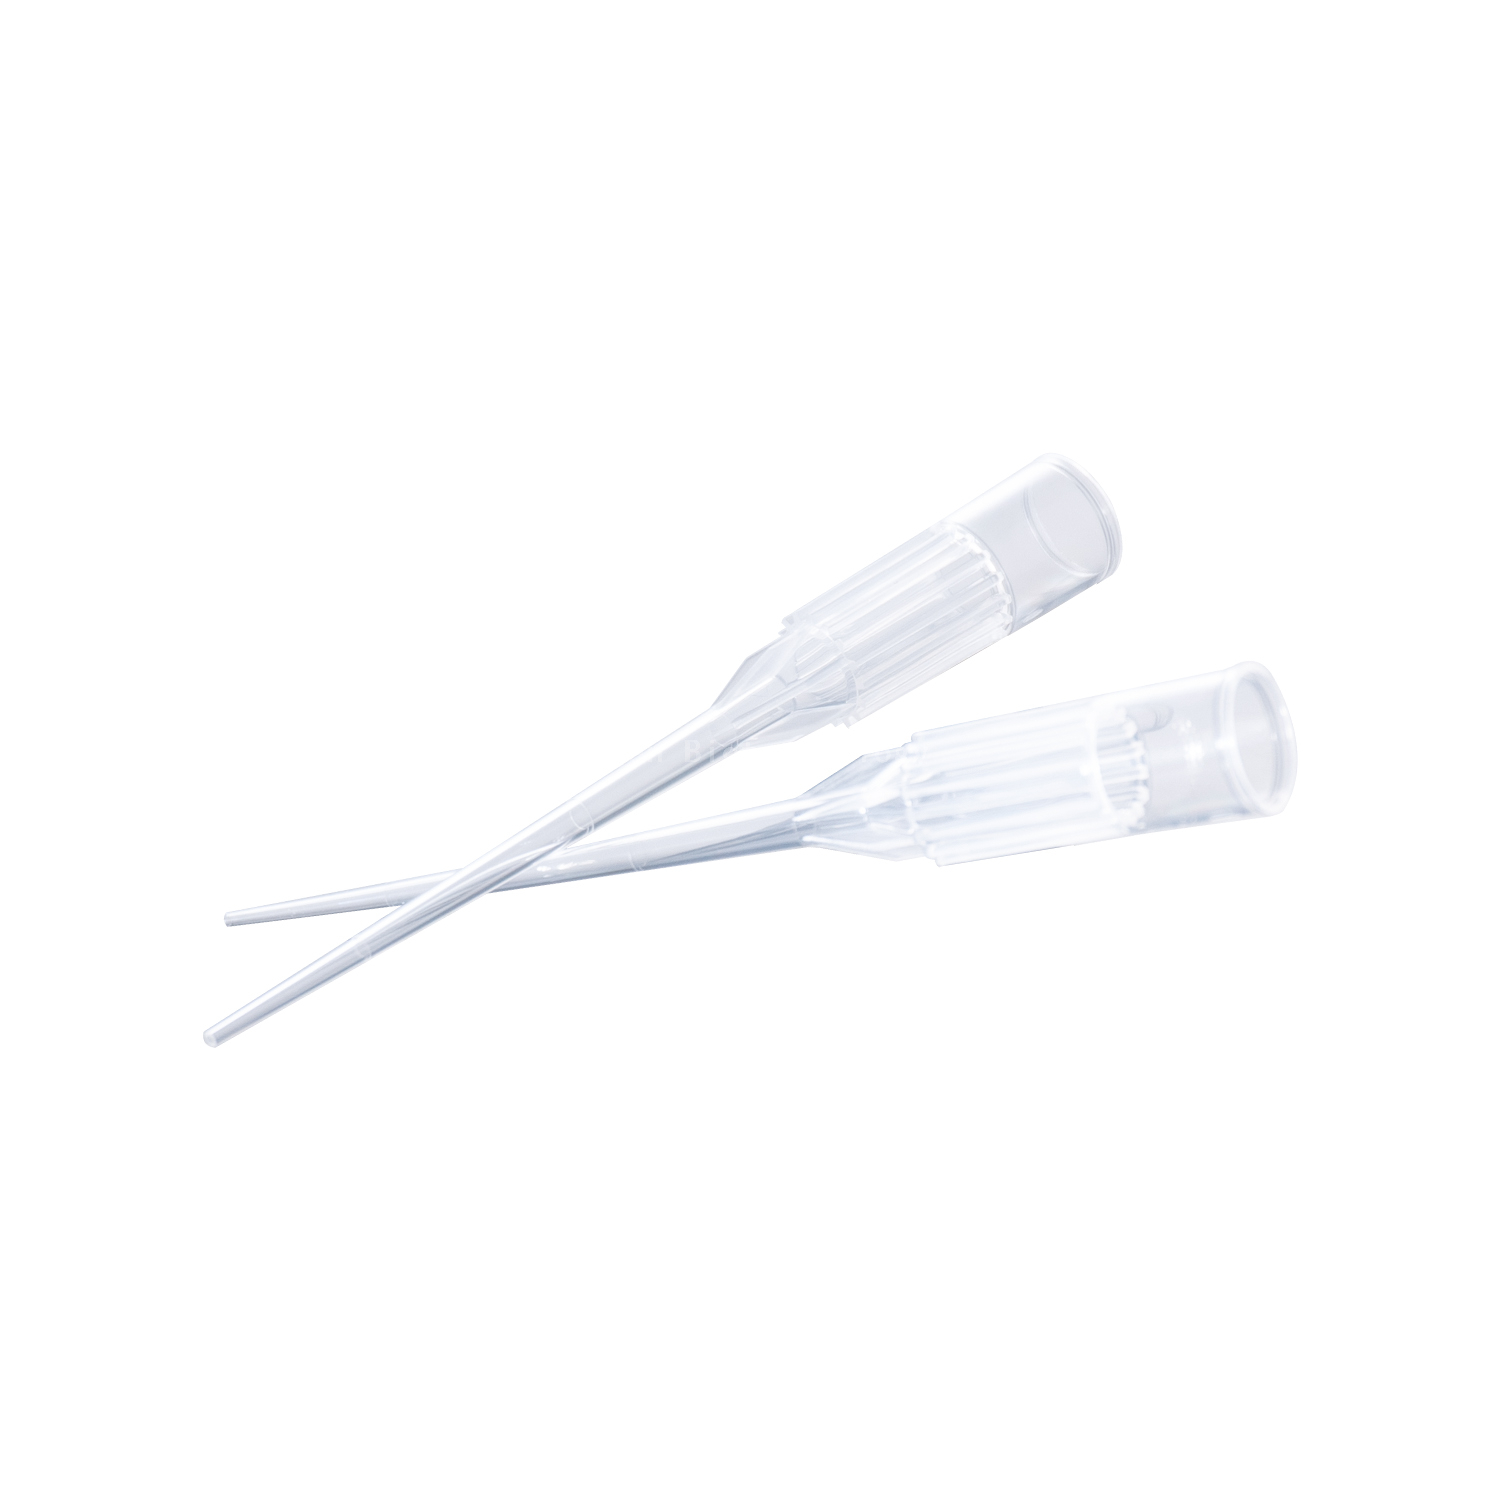 Rainin low retention 10uL transparent midsci pipette tips with Eco space safe package 